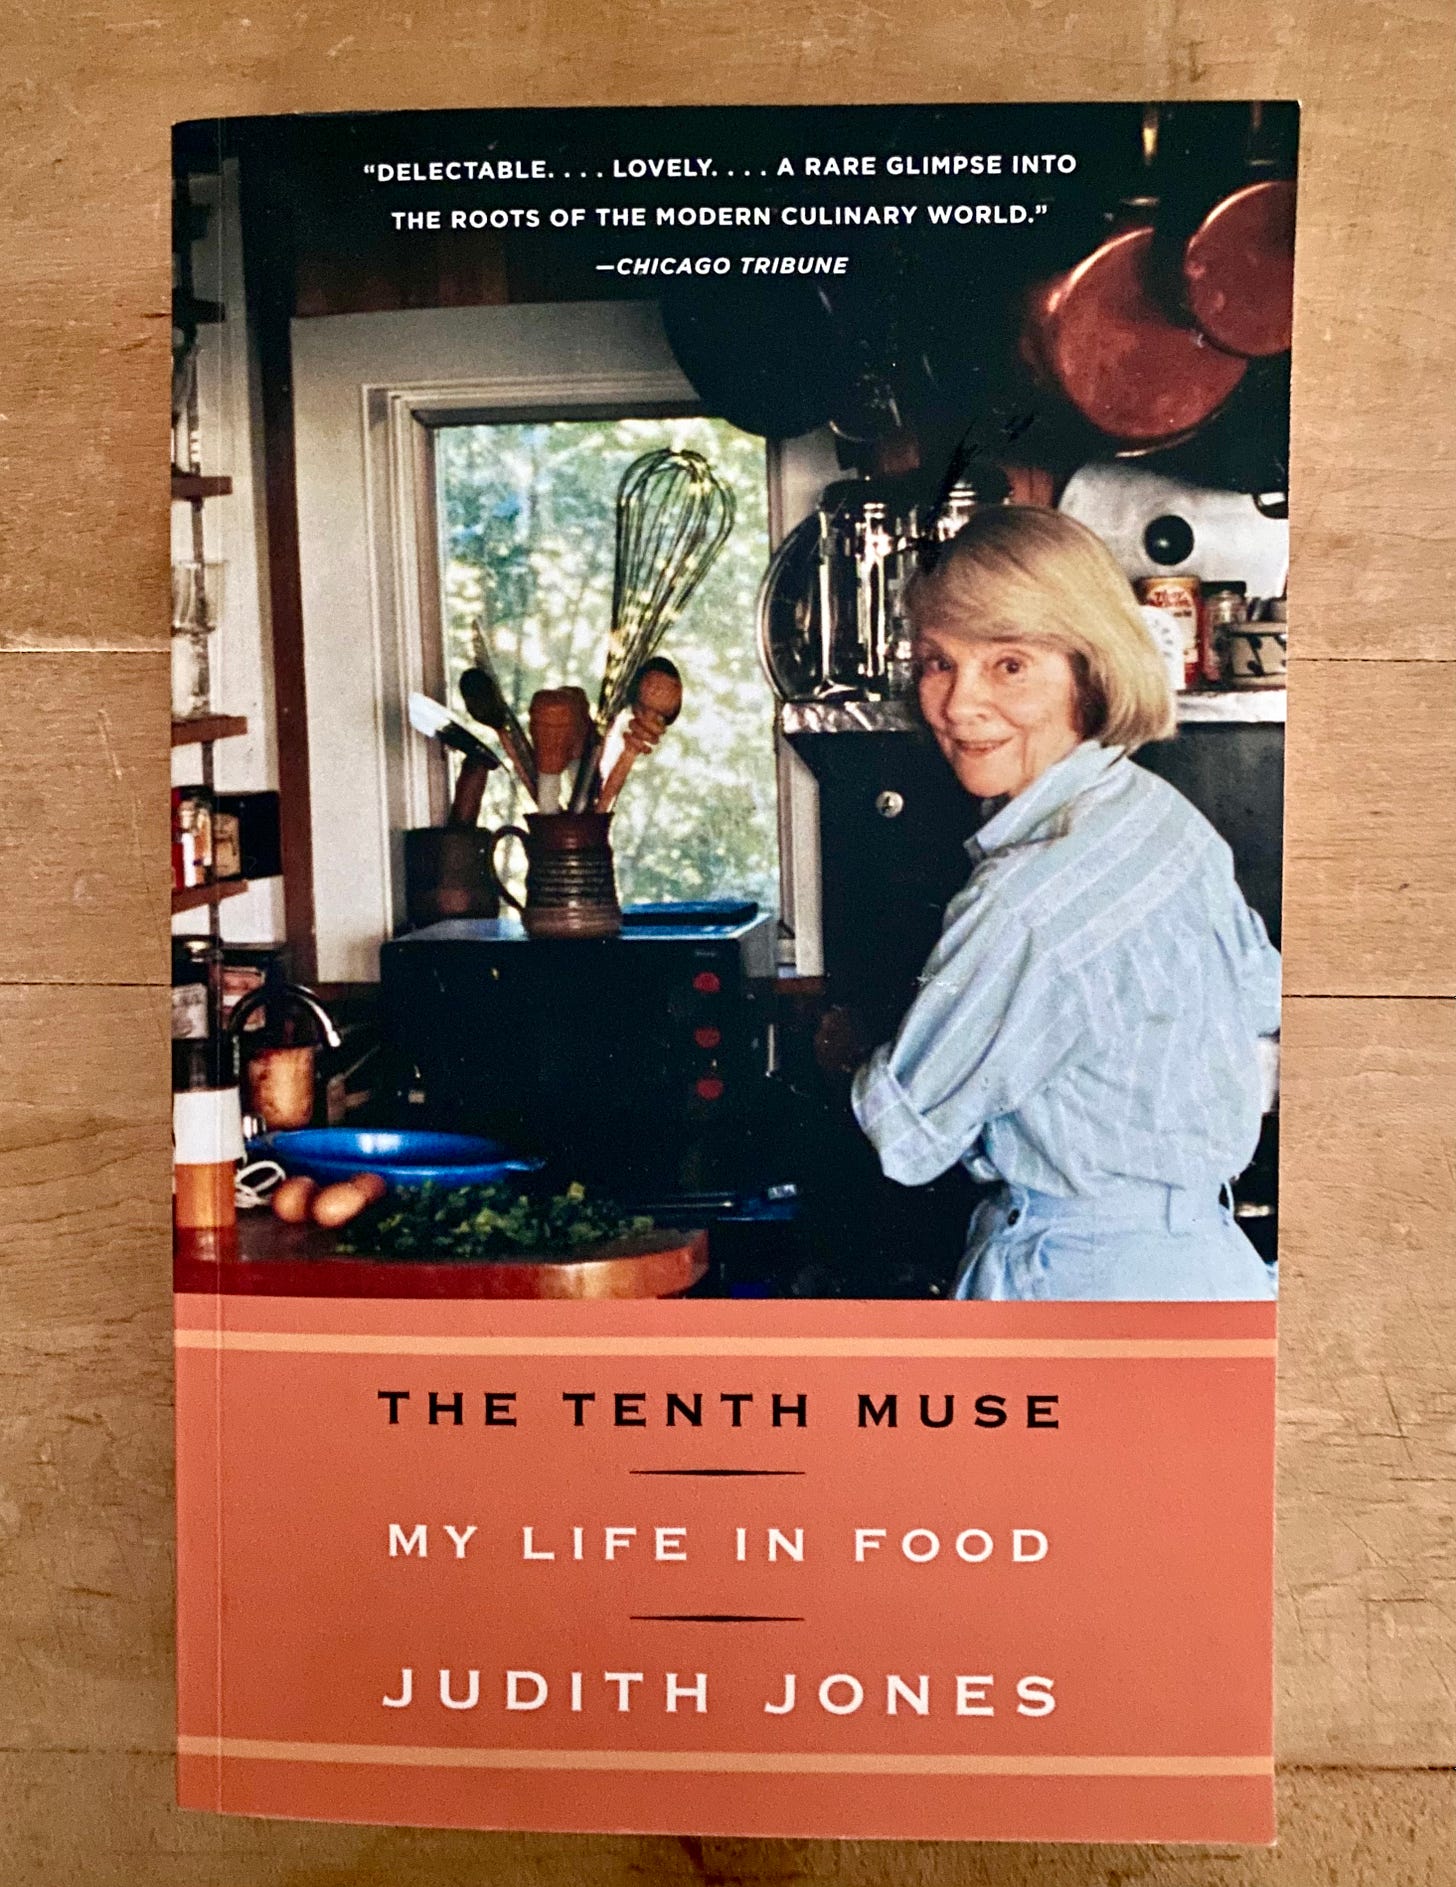 The Tenth Muse: My Life in Food by Judith Jones